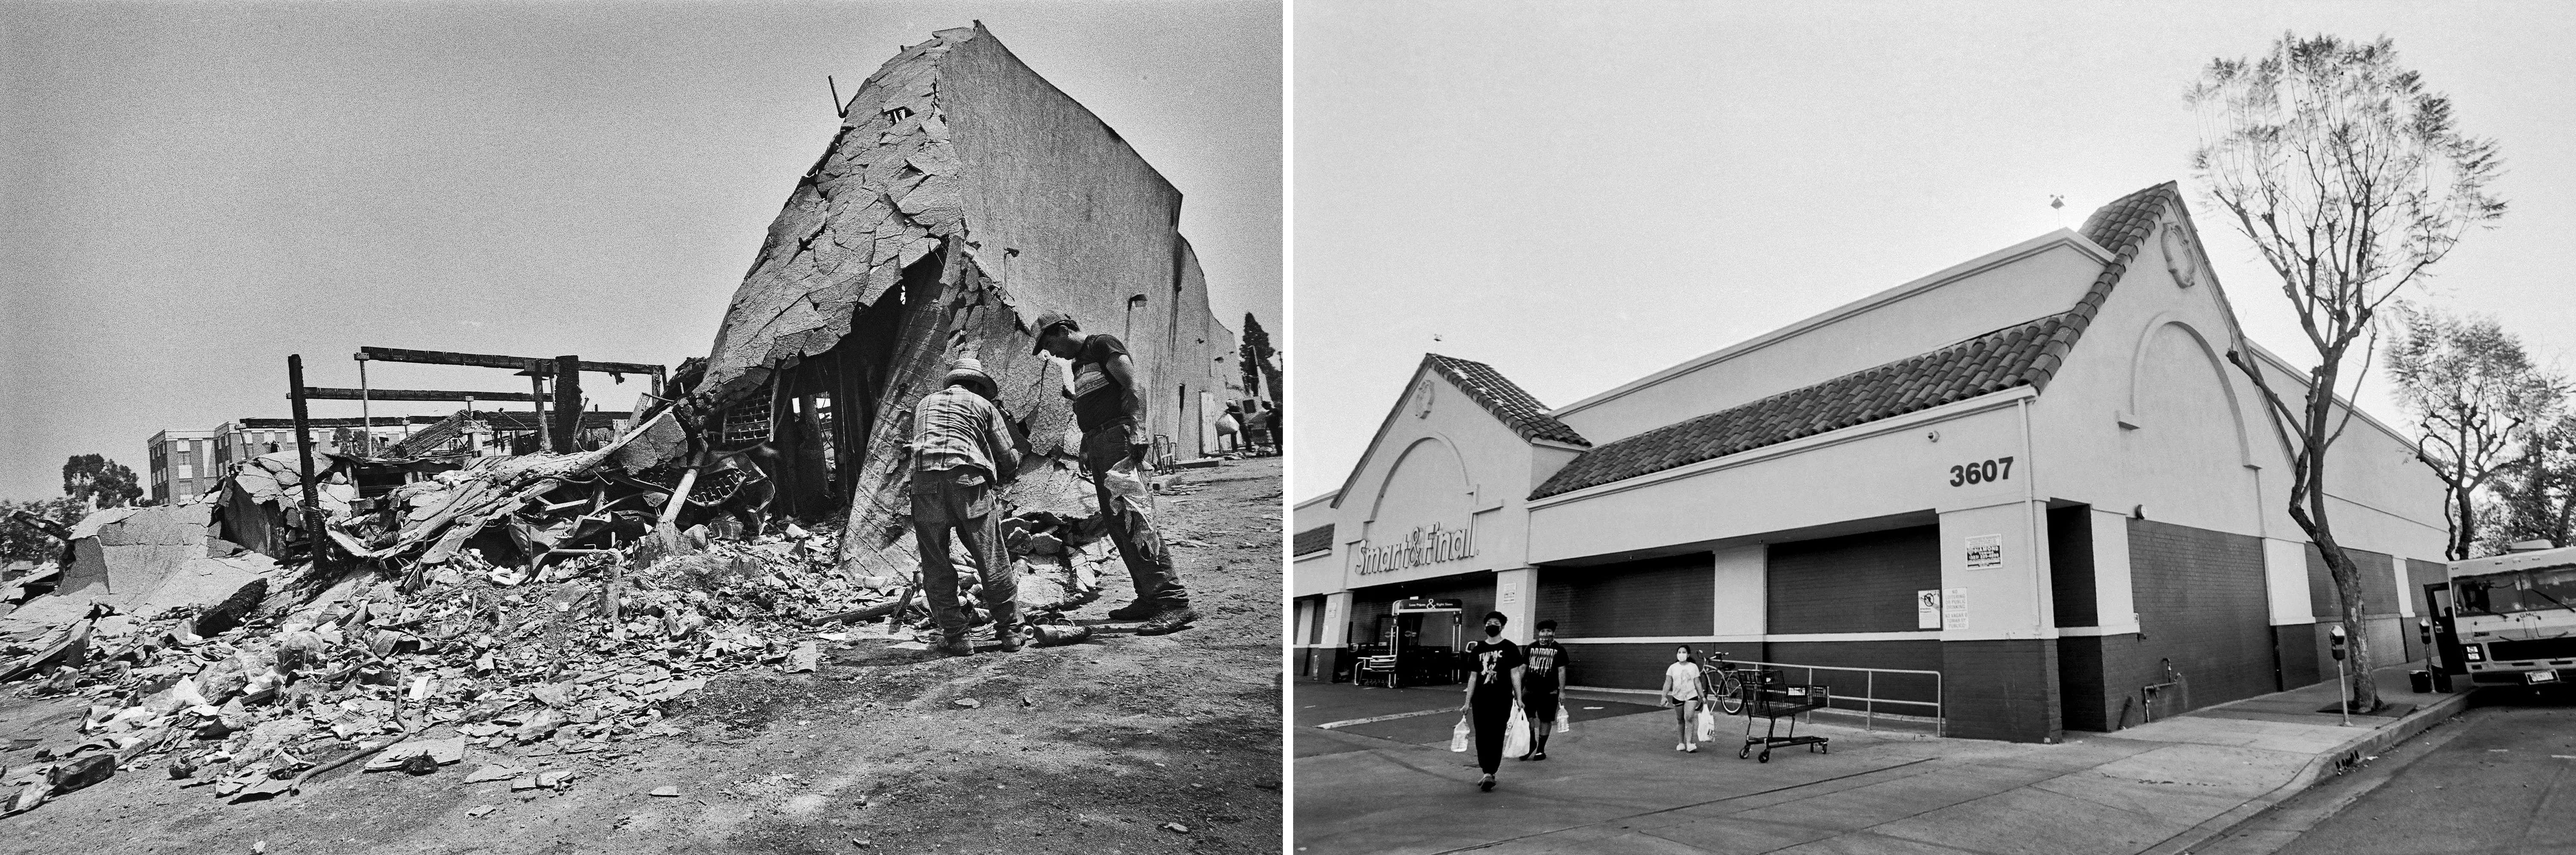 Two pictures are shown side by side: On the left, a destroyed building; on the right, a shopping center.